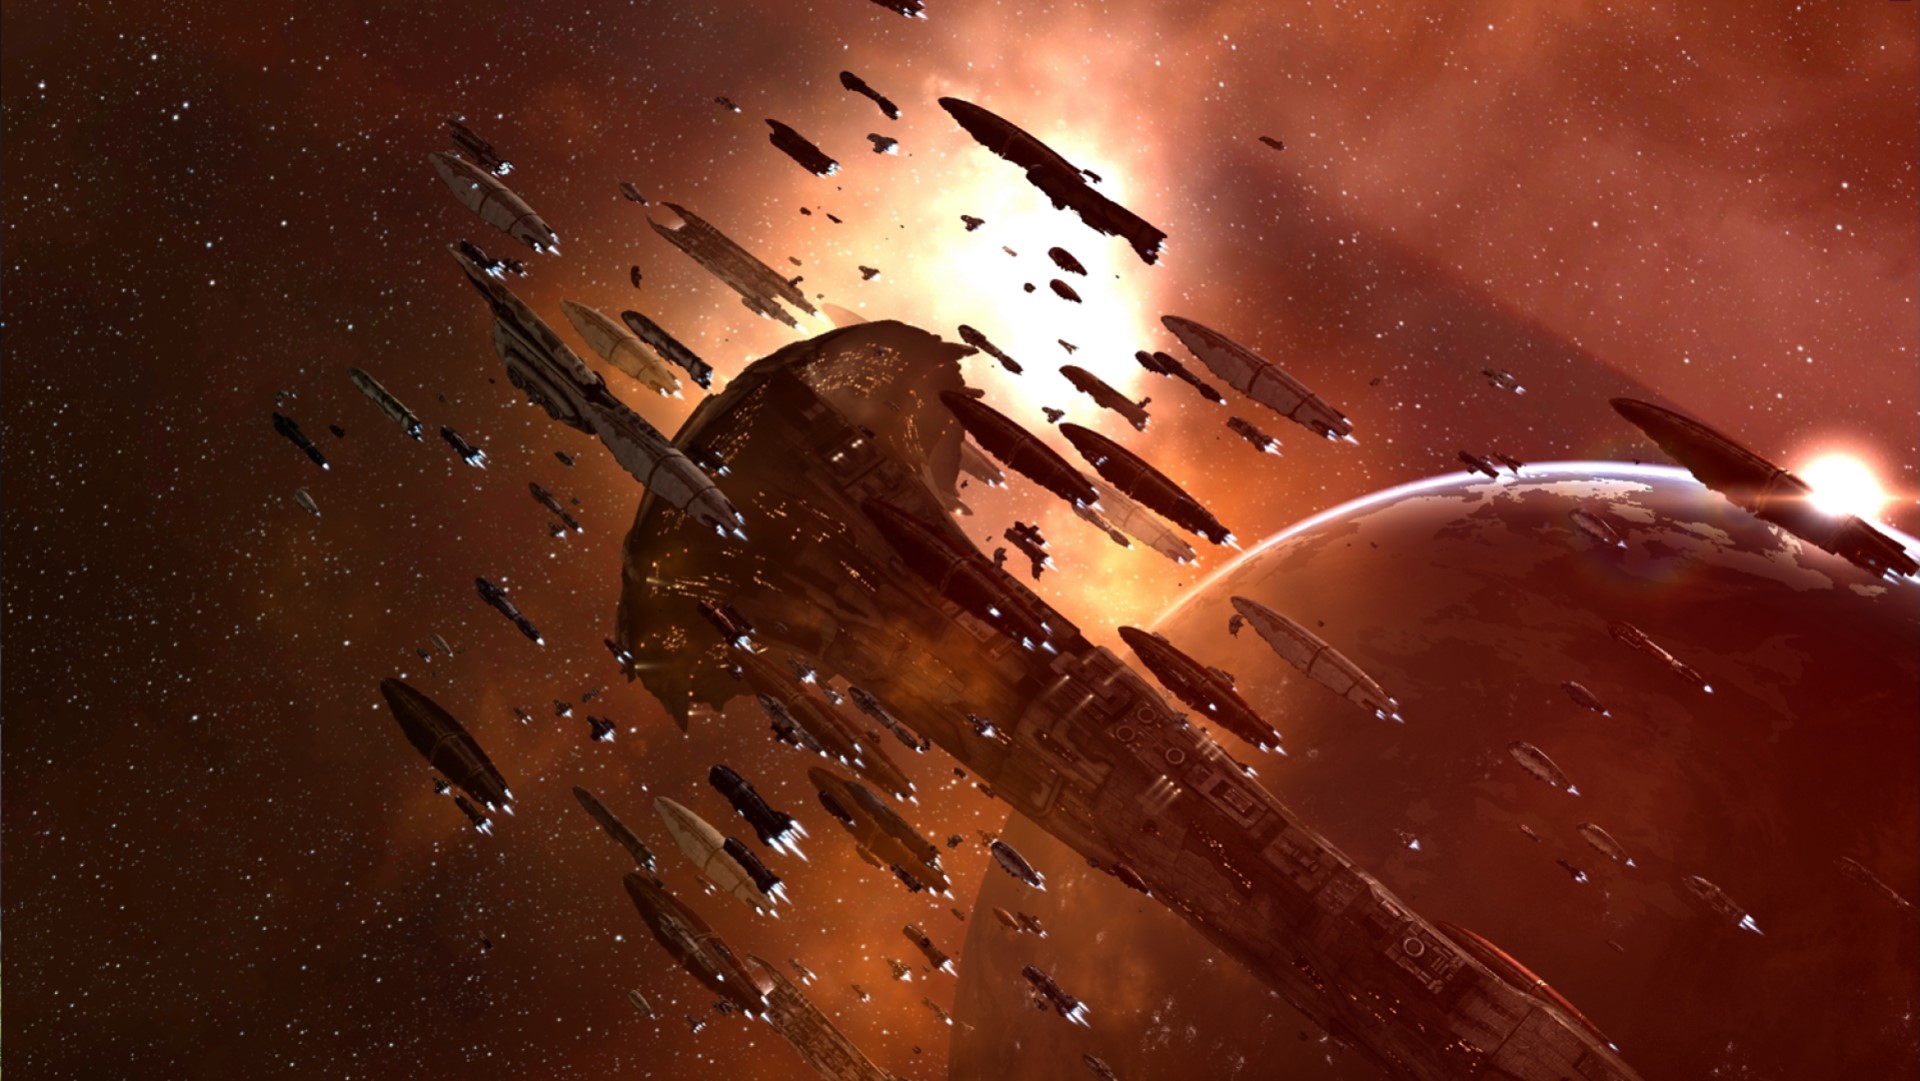 Two Eve Online expansions are coming this year